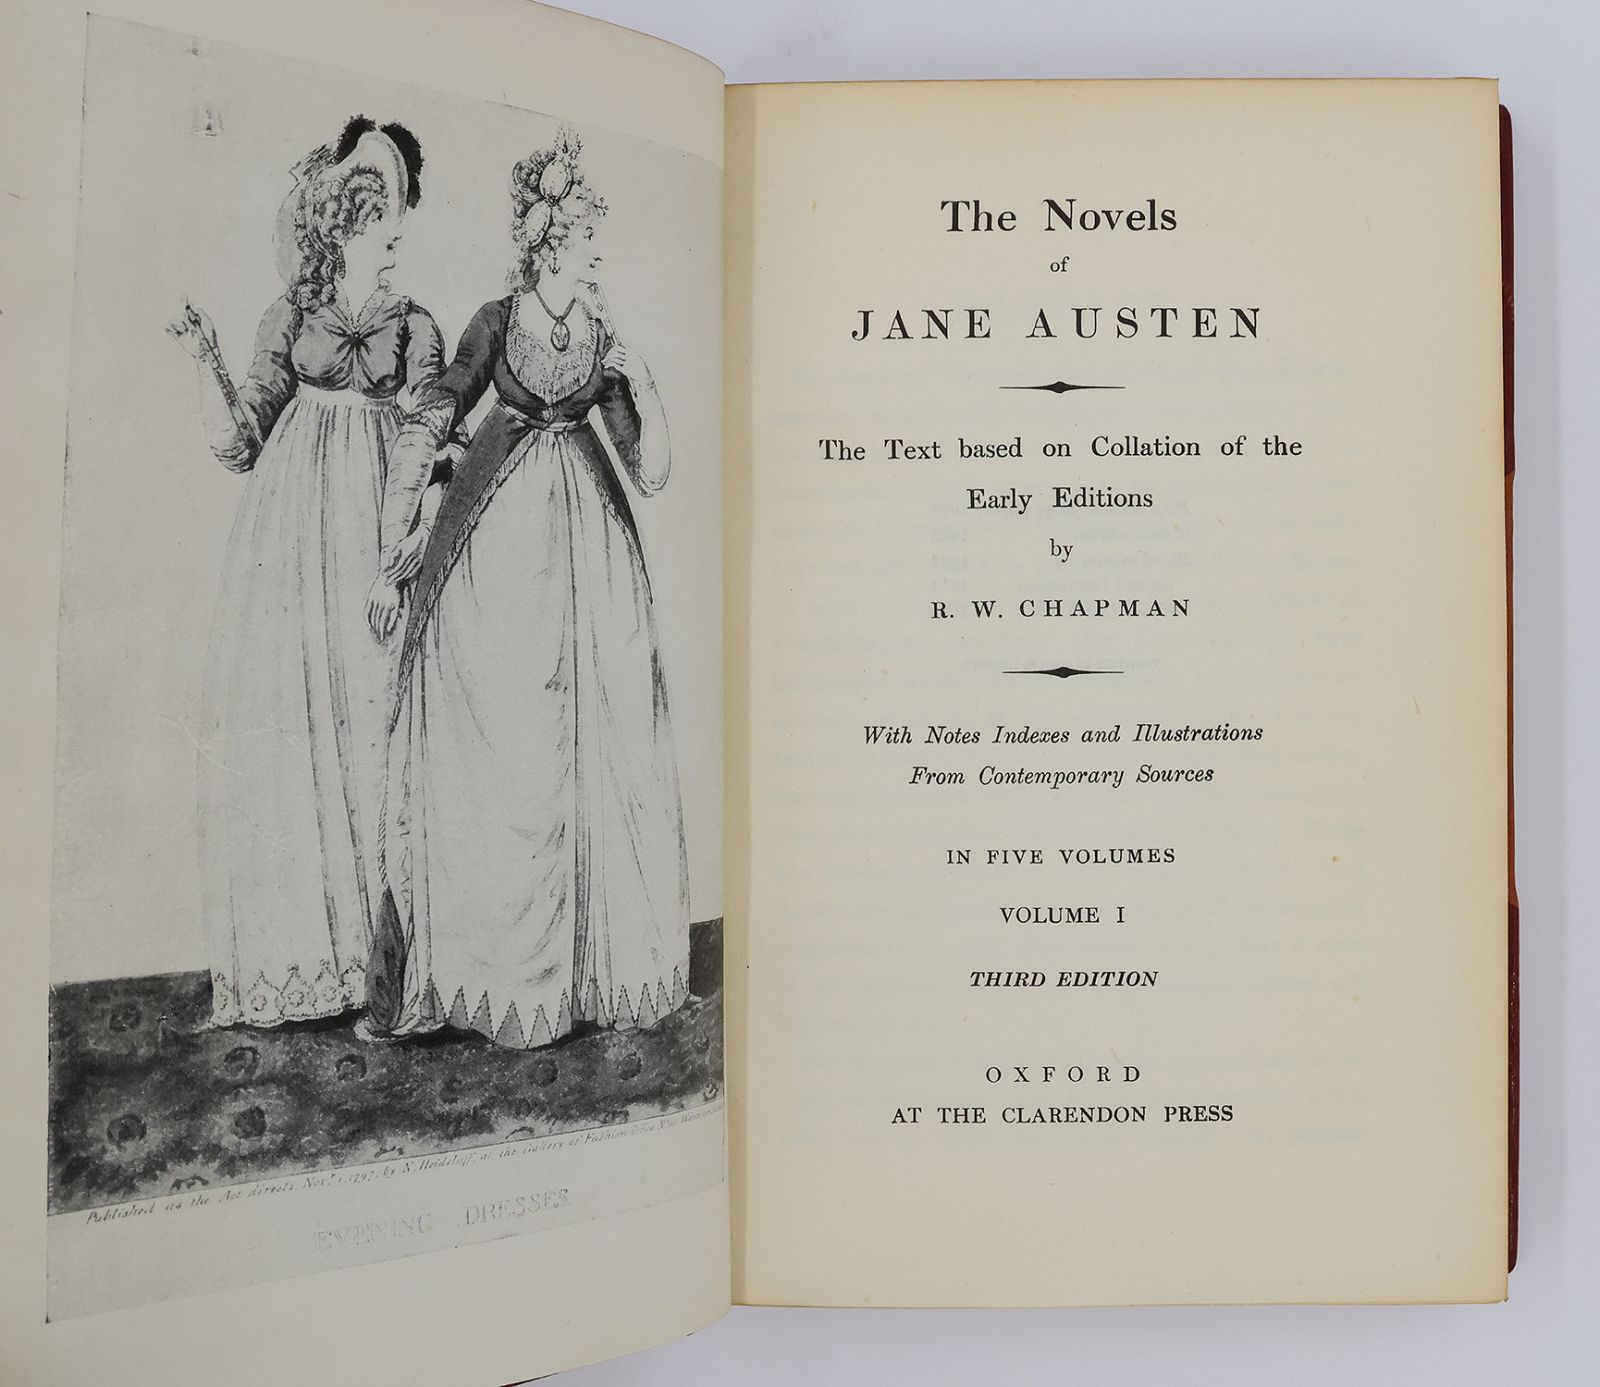 THE NOVELS OF JANE AUSTEN: PRIDE AND PREJUDICE; SENSE AND SENSIBILITY; EMMA; MANSFIELD PARK; NORTHANGER ABBEY AND PERSUASION. -  image 4